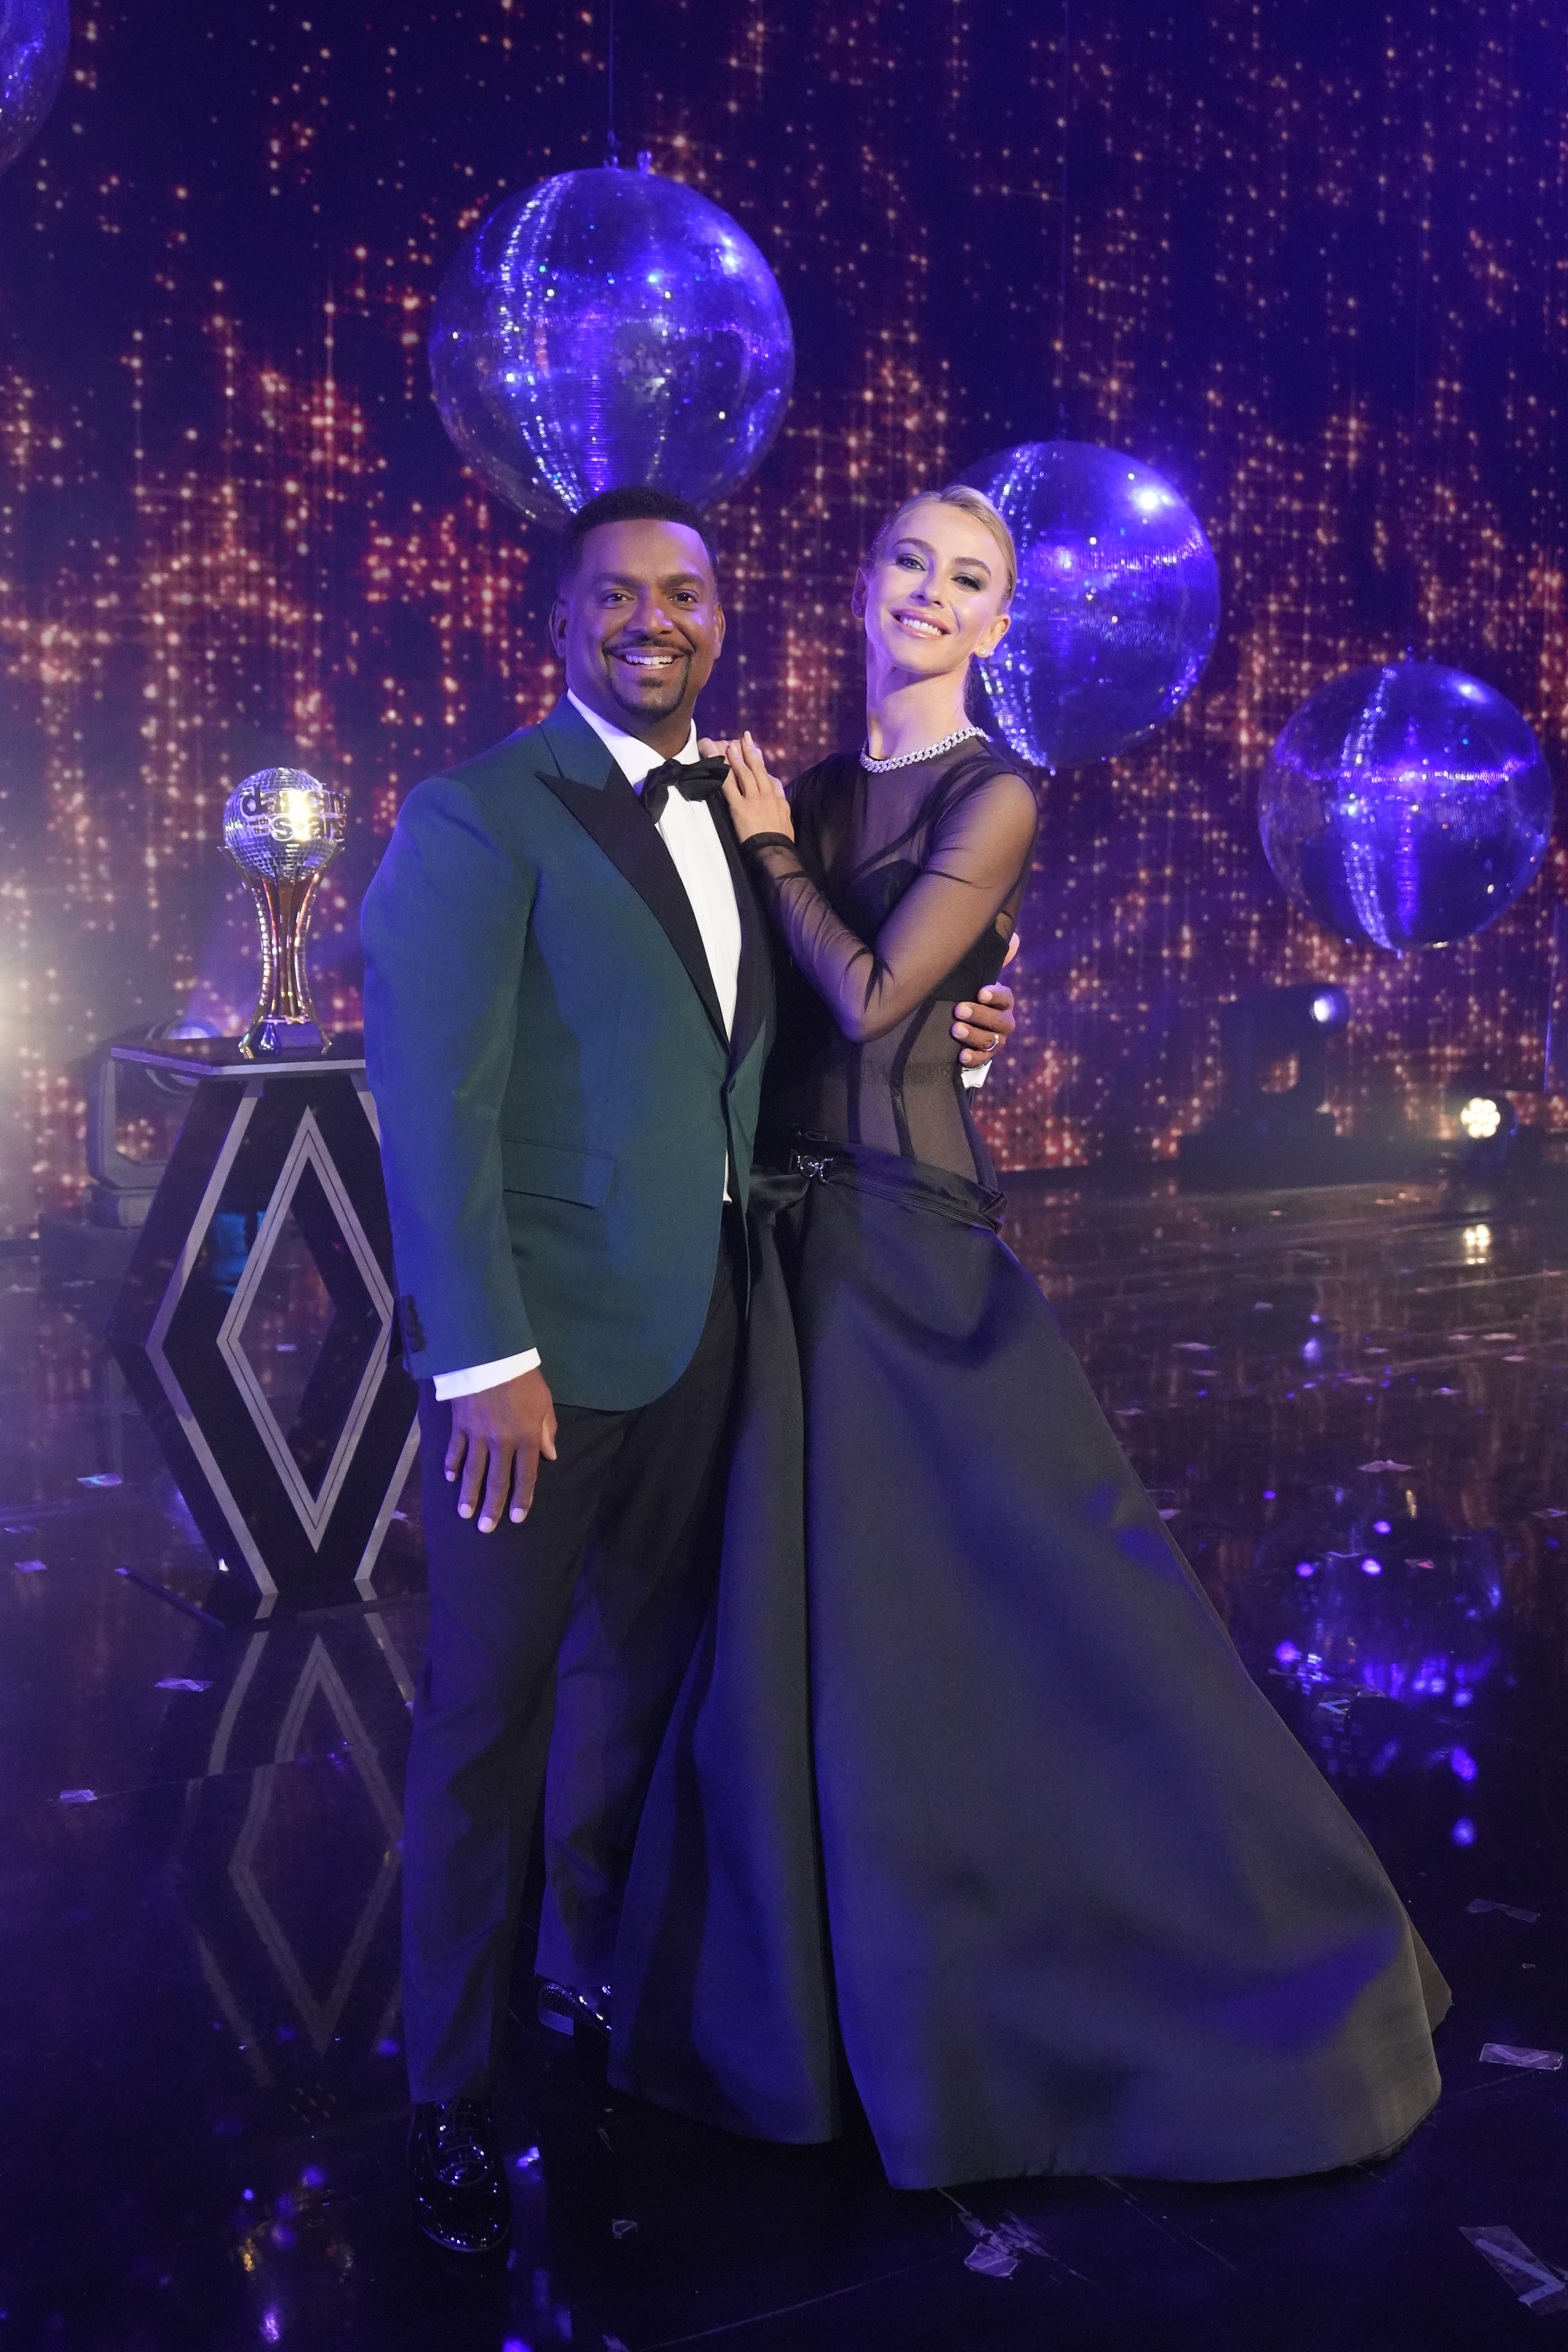 Julianne pictured With Alfonso Ribeiro